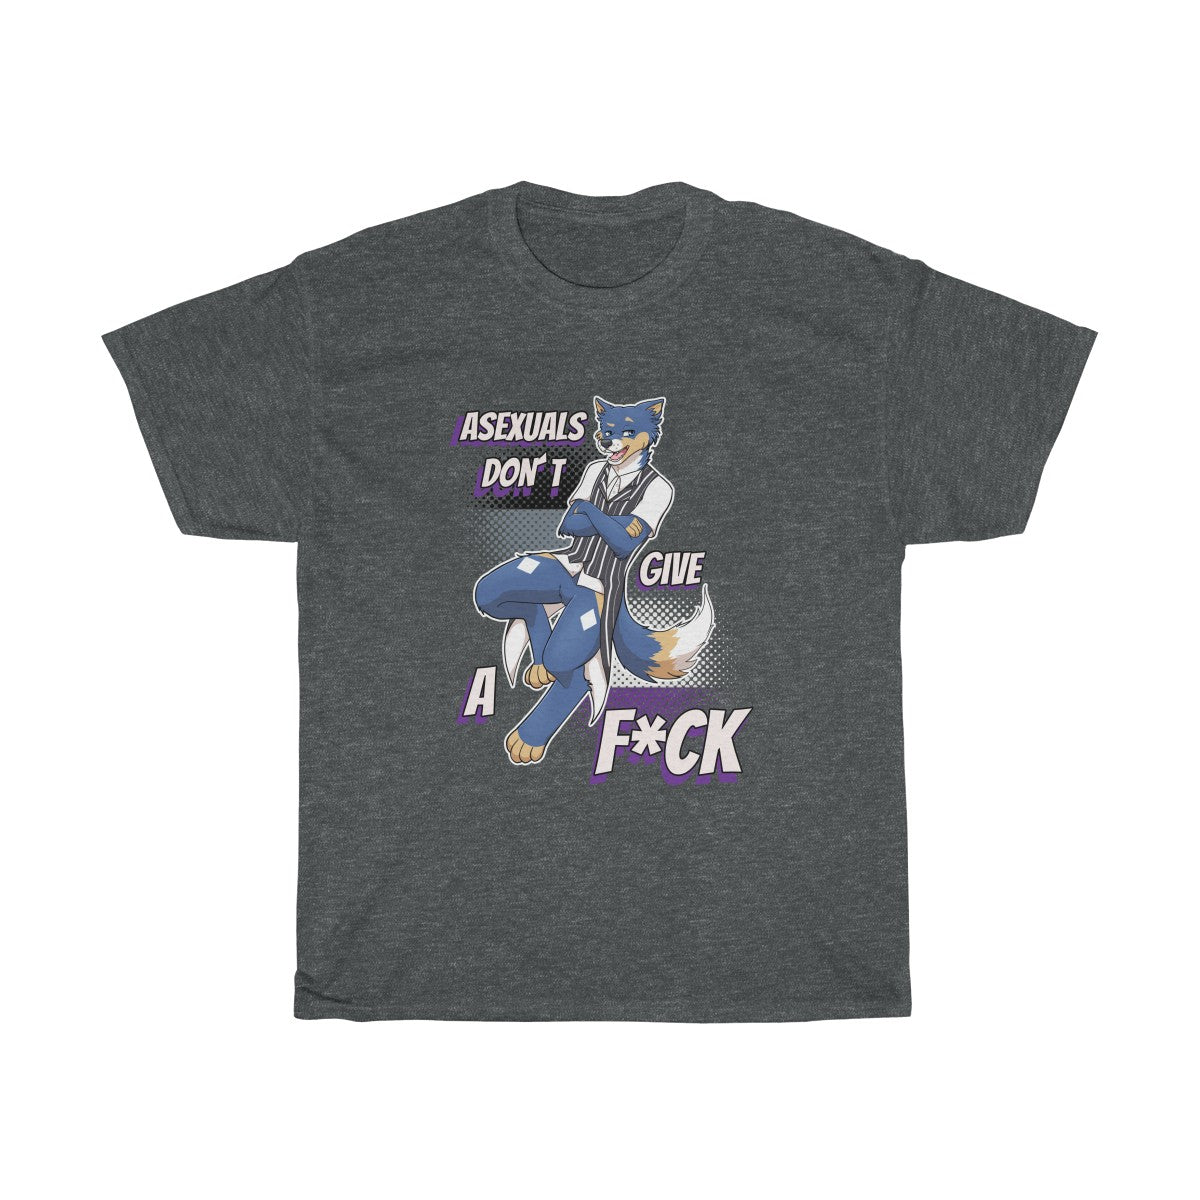 Asexual Don't Give A F*ck - T-Shirt T-Shirt Artemis Wishfoot Dark Heather S 